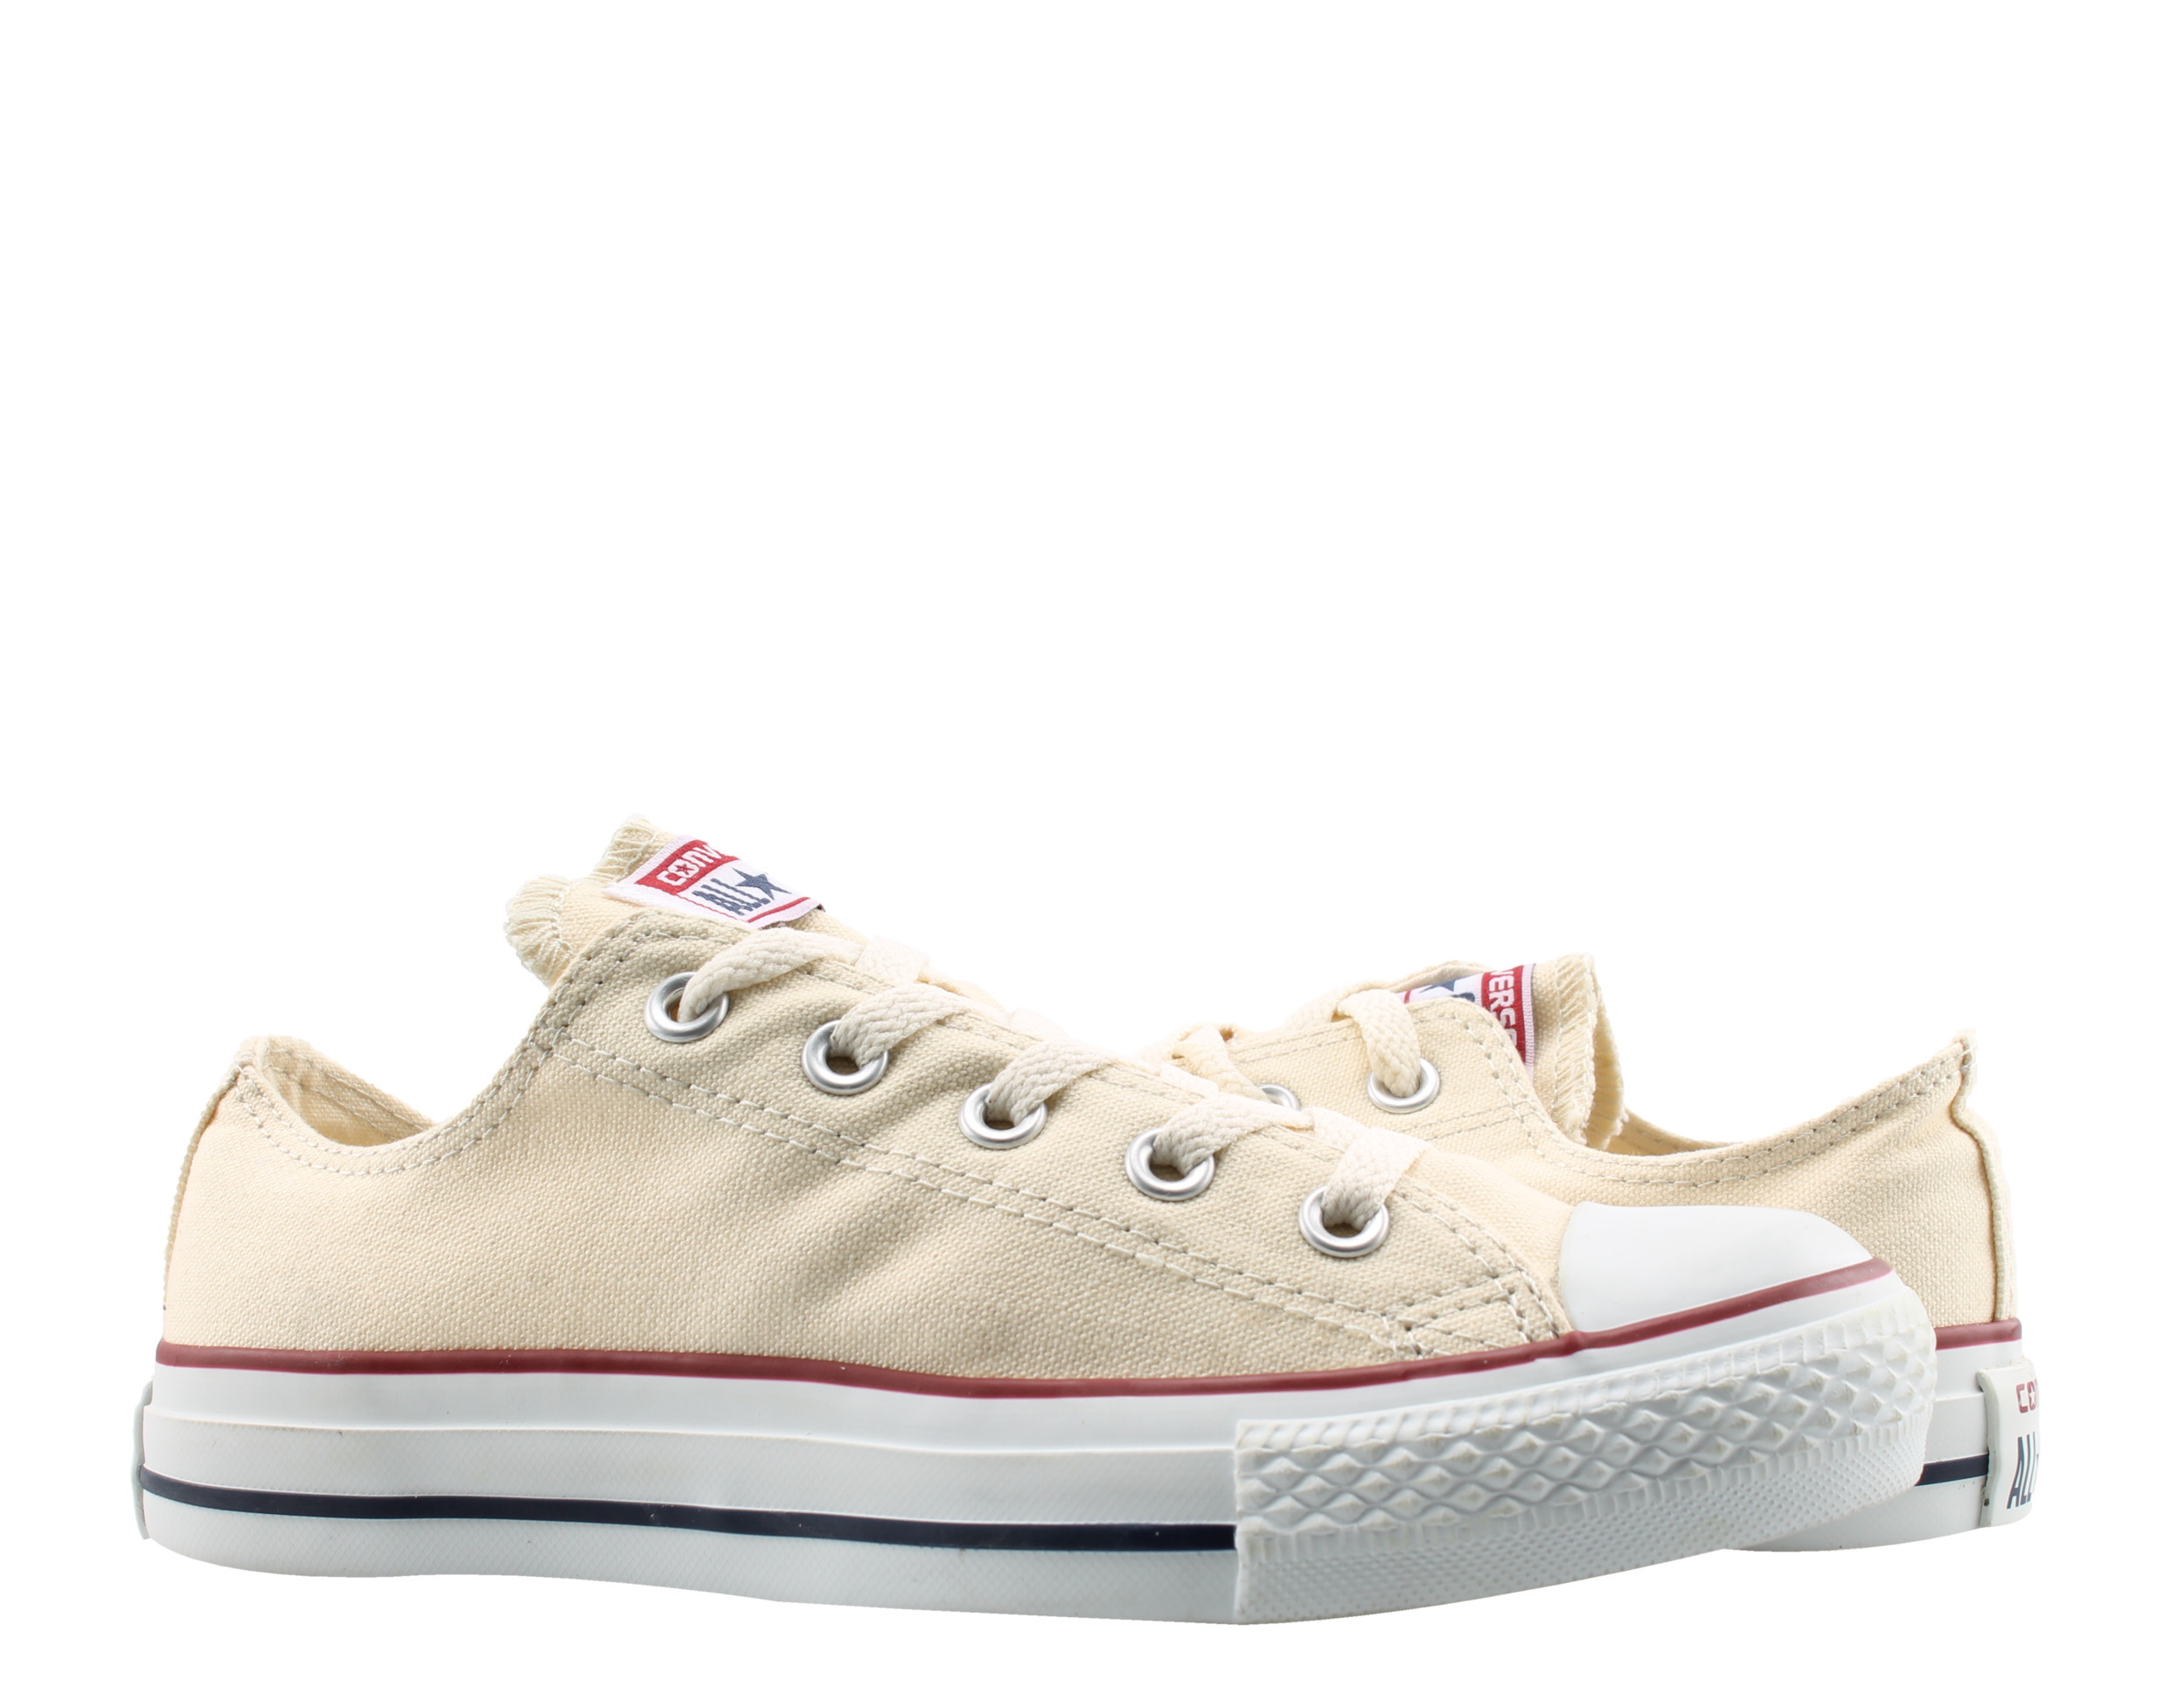 Converse Chuck Taylor OX All Star Big Kids Sneakers Unbleach White m9165 - image 1 of 6